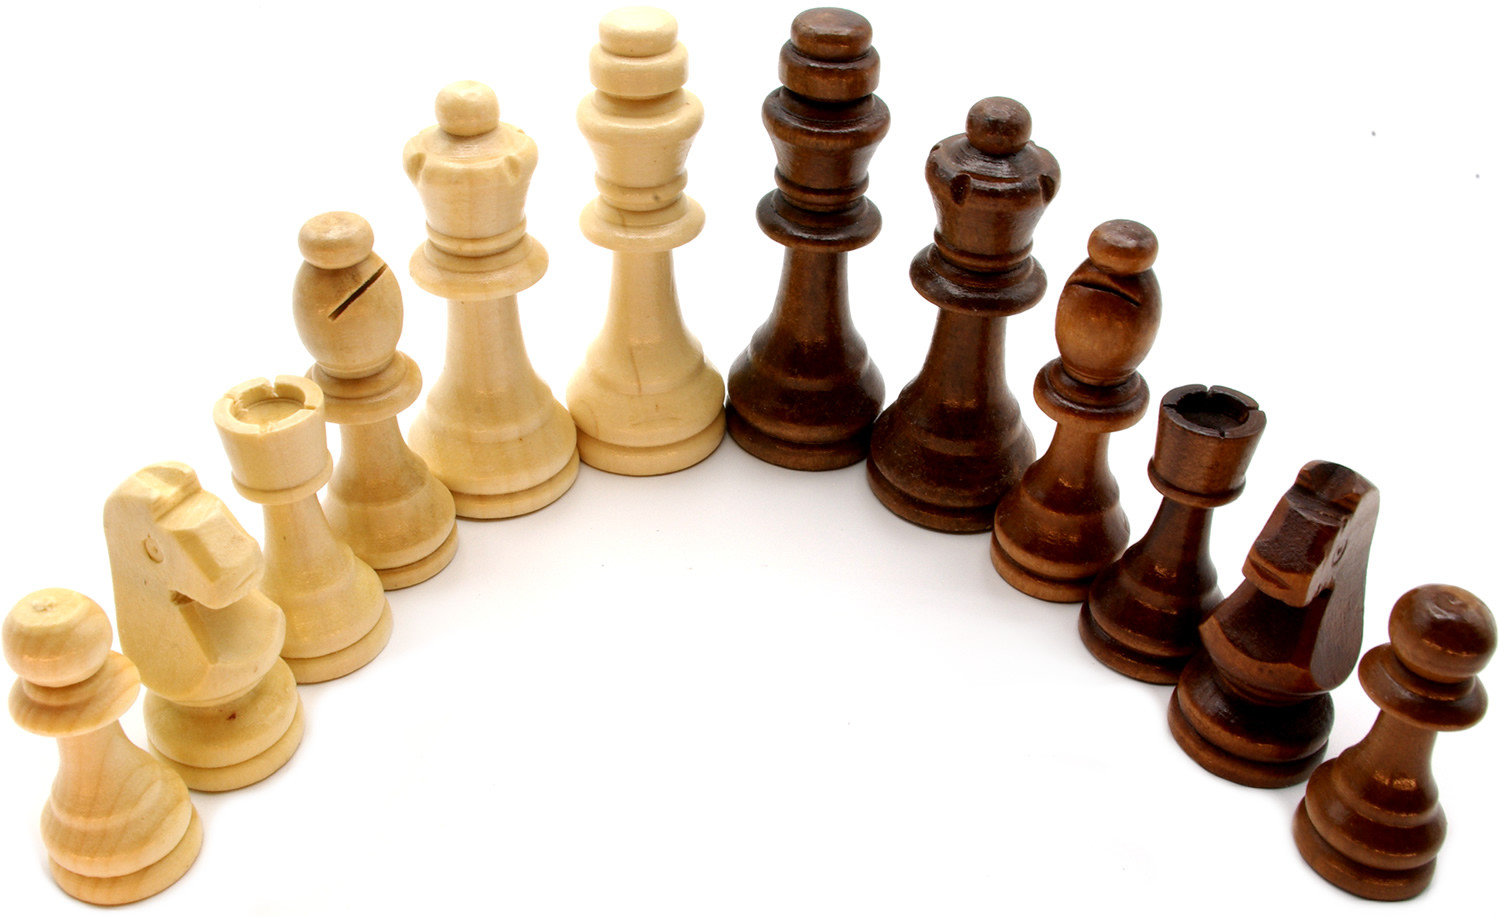 No.1 (50mm) wood Chess pieces / Chessmen